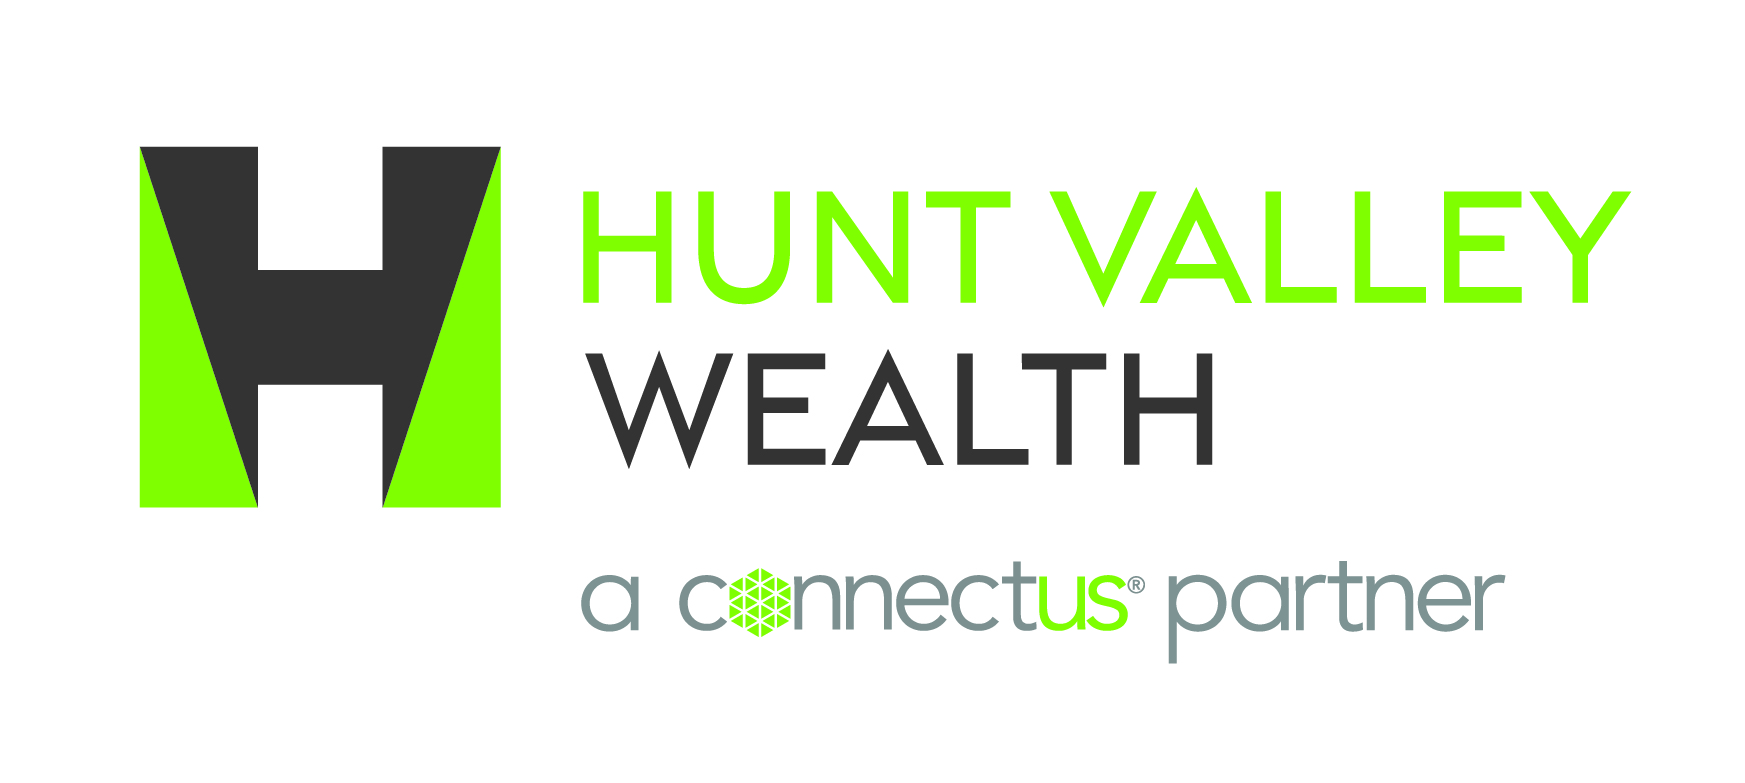 Hunt Valley Wealth, Wednesday, July 6, 2022, Press release picture